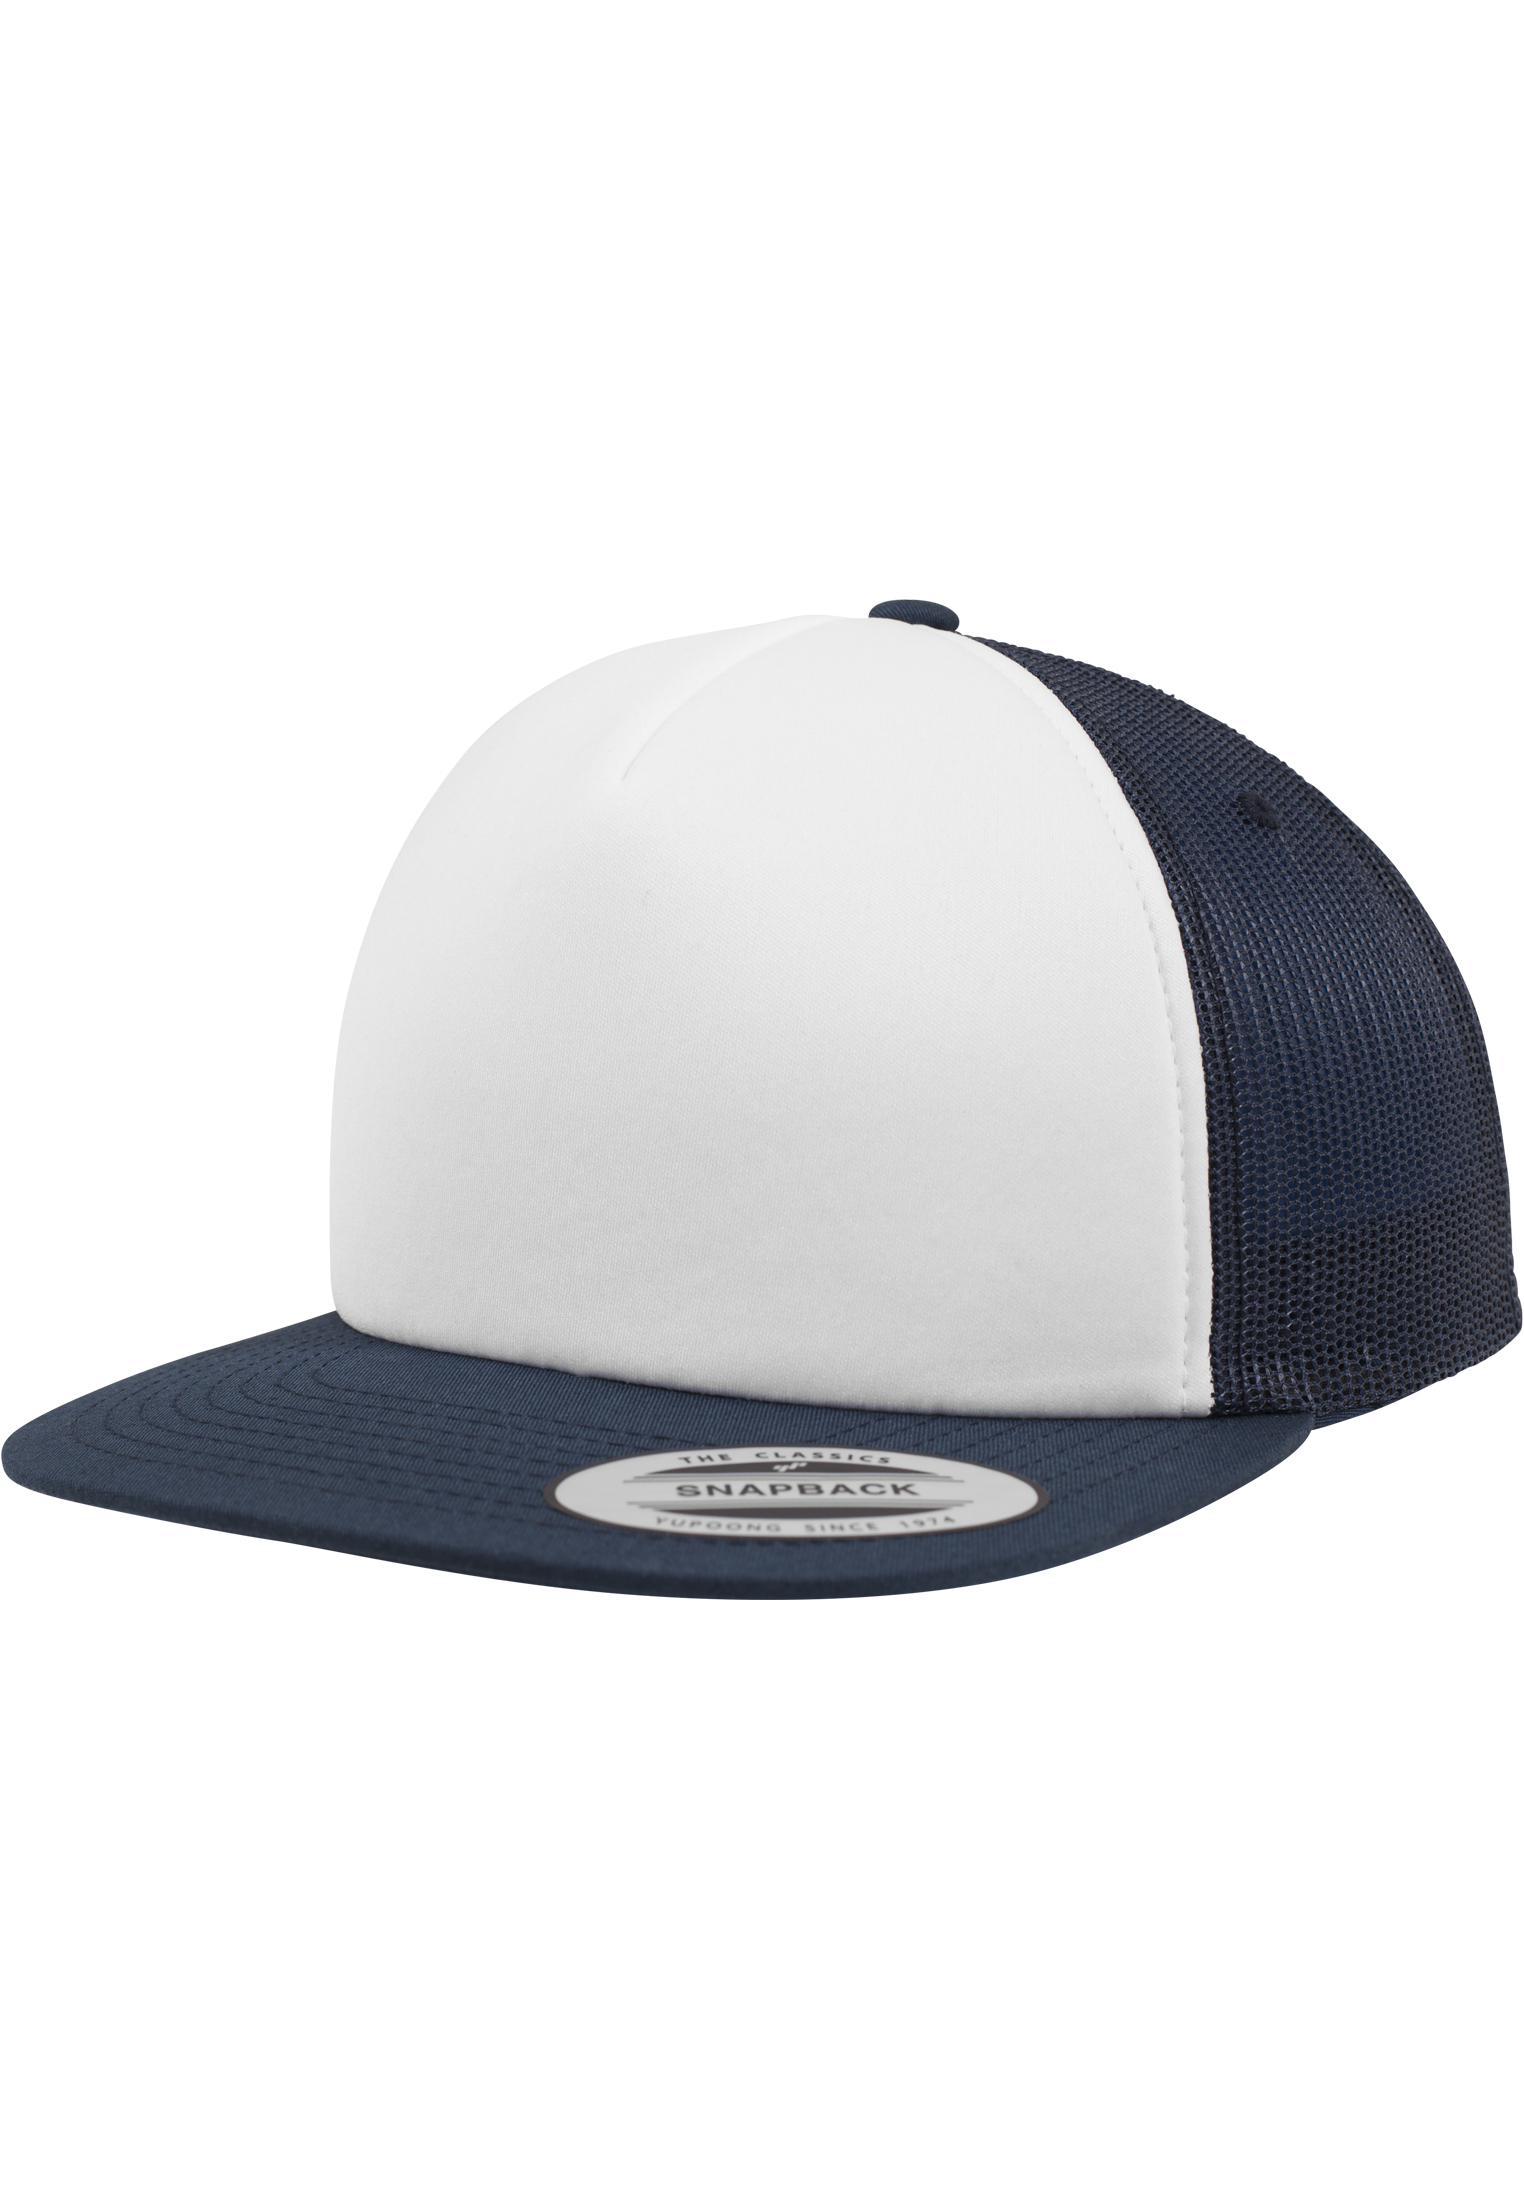 Trucker Foam Trucker with White Front in Farbe nvy/wht/nvy